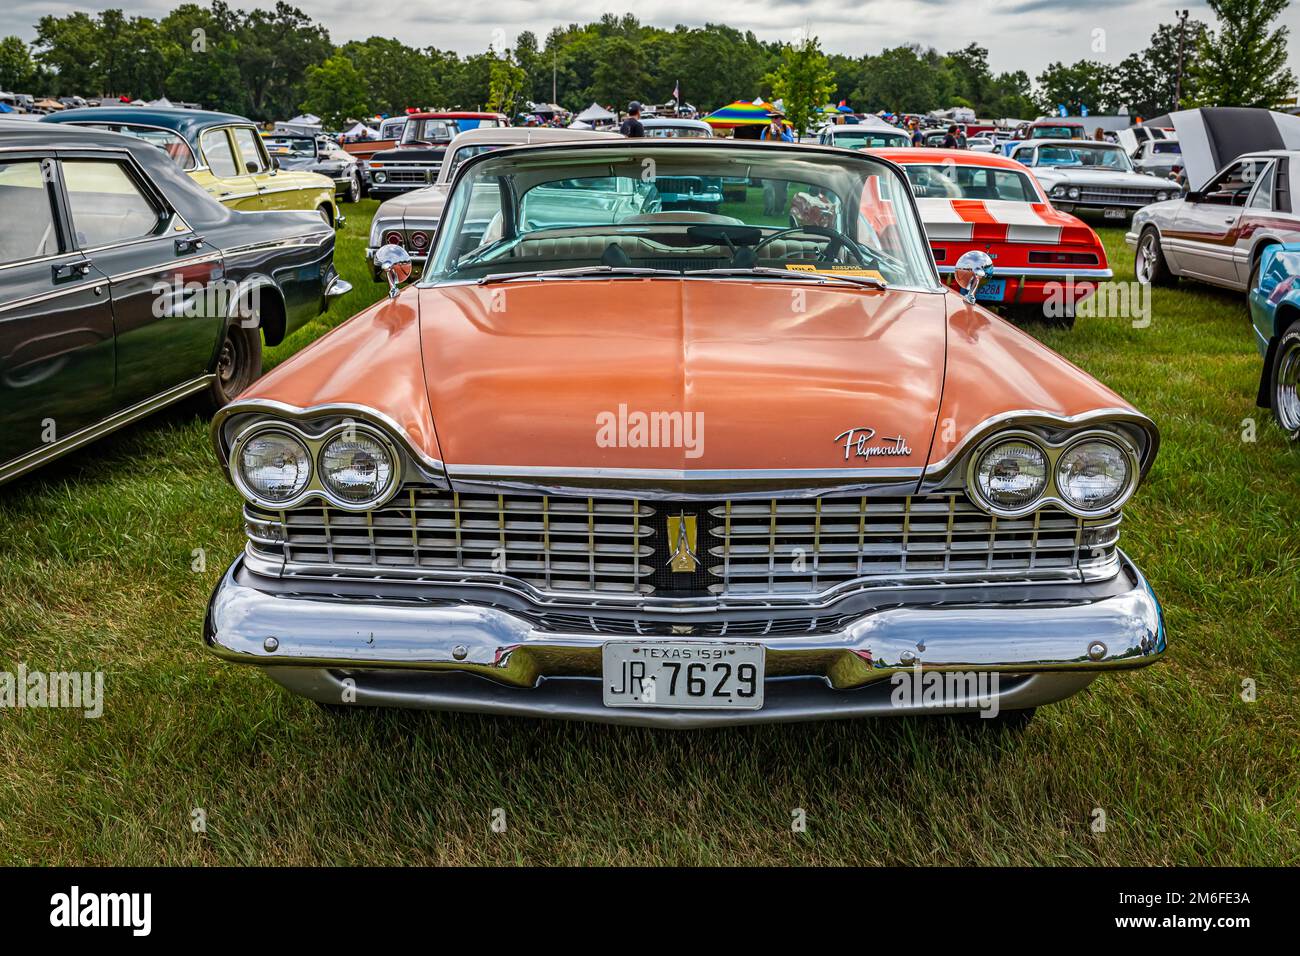 Iola, WI - July 07, 2022: High perspective front view of a 1959 Plymouth Sport Fury 2 Door Hardtop at a local car show. Stock Photo